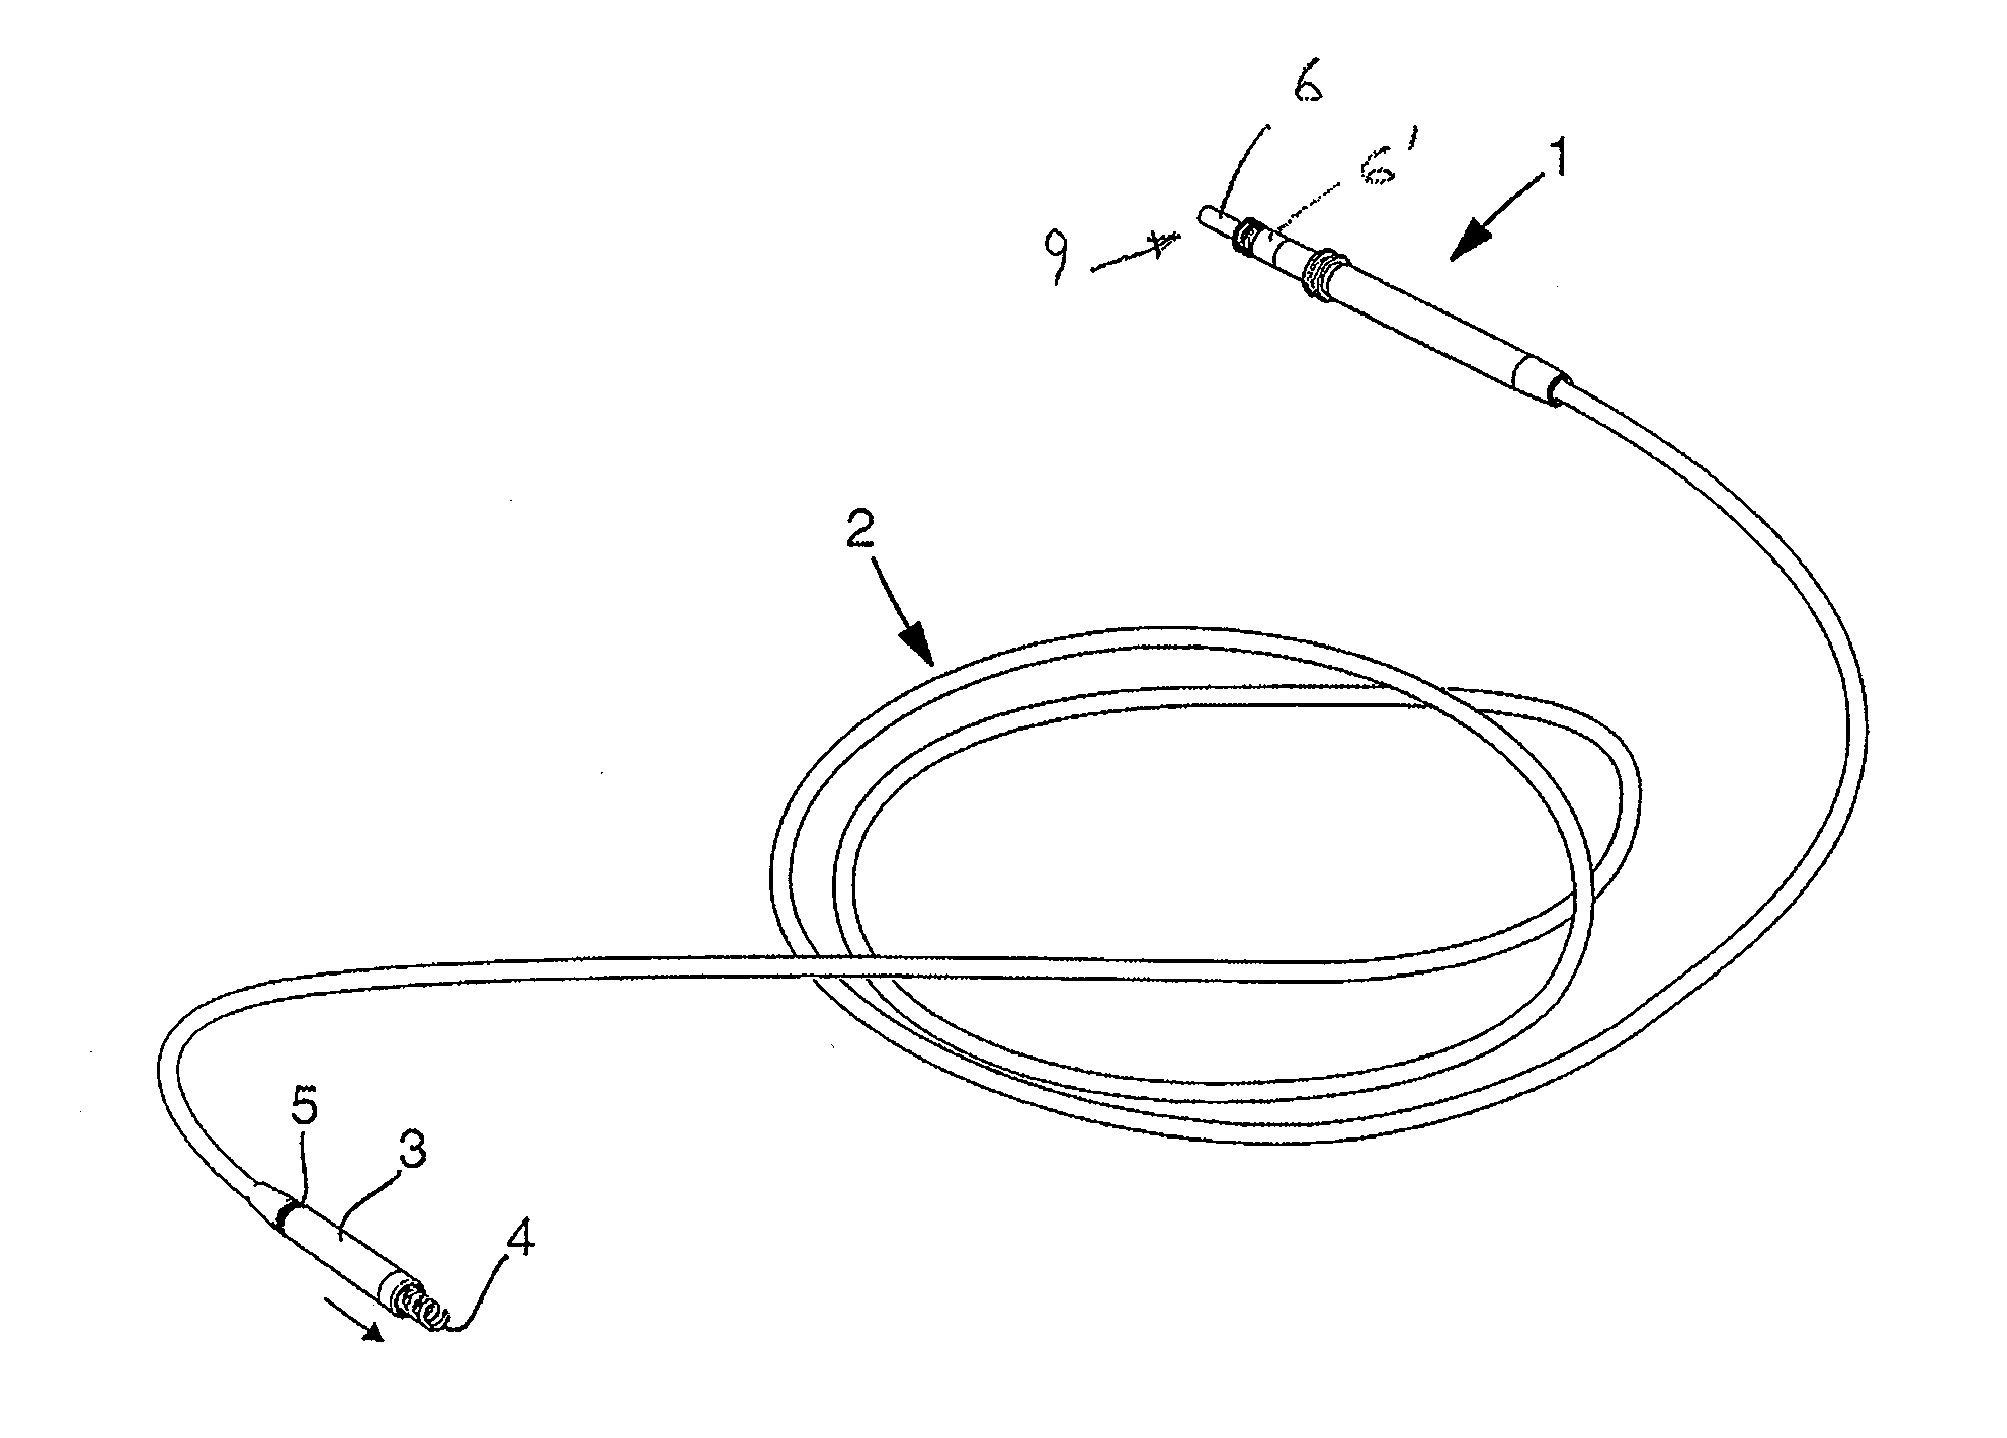 Medical implanatble lead with fixation detection